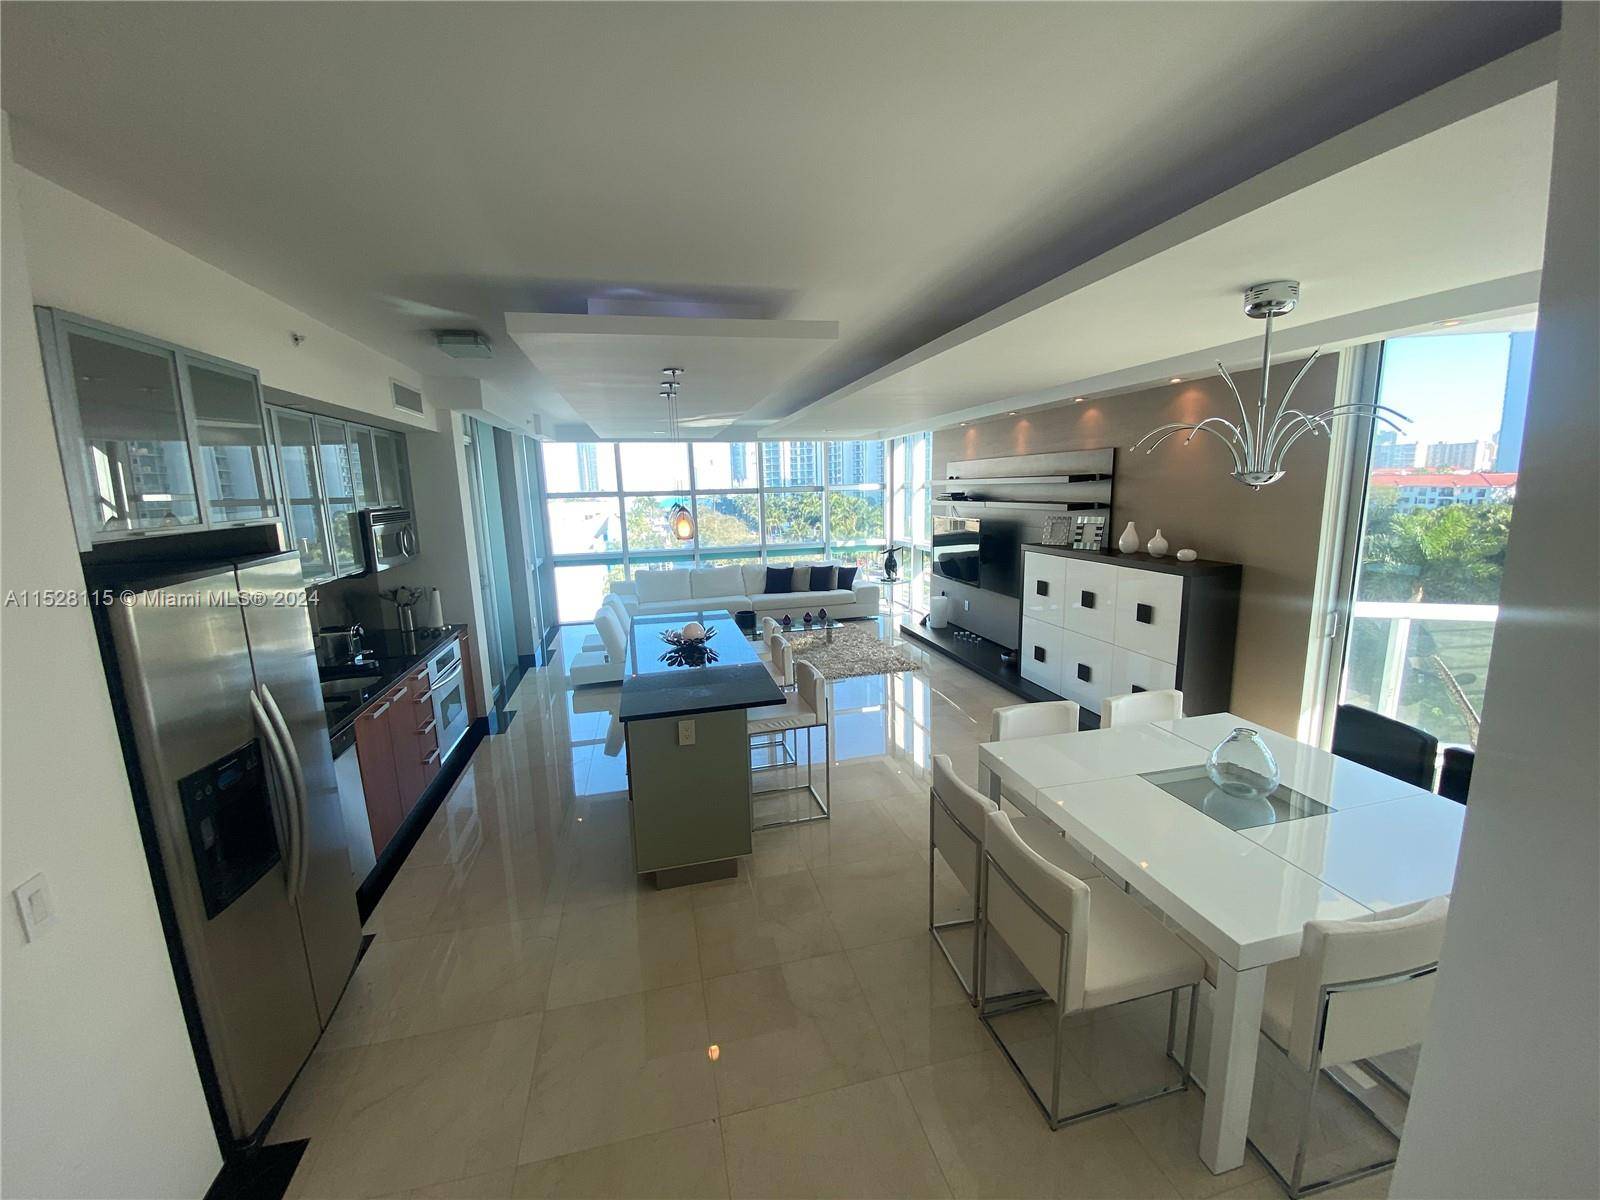 WELCOME TO THE ATRIUM AT AVENTURA AMAZING WATER FRONT CONDO OFFERING A LIFESTYLE OF LUXURY COMFORT.